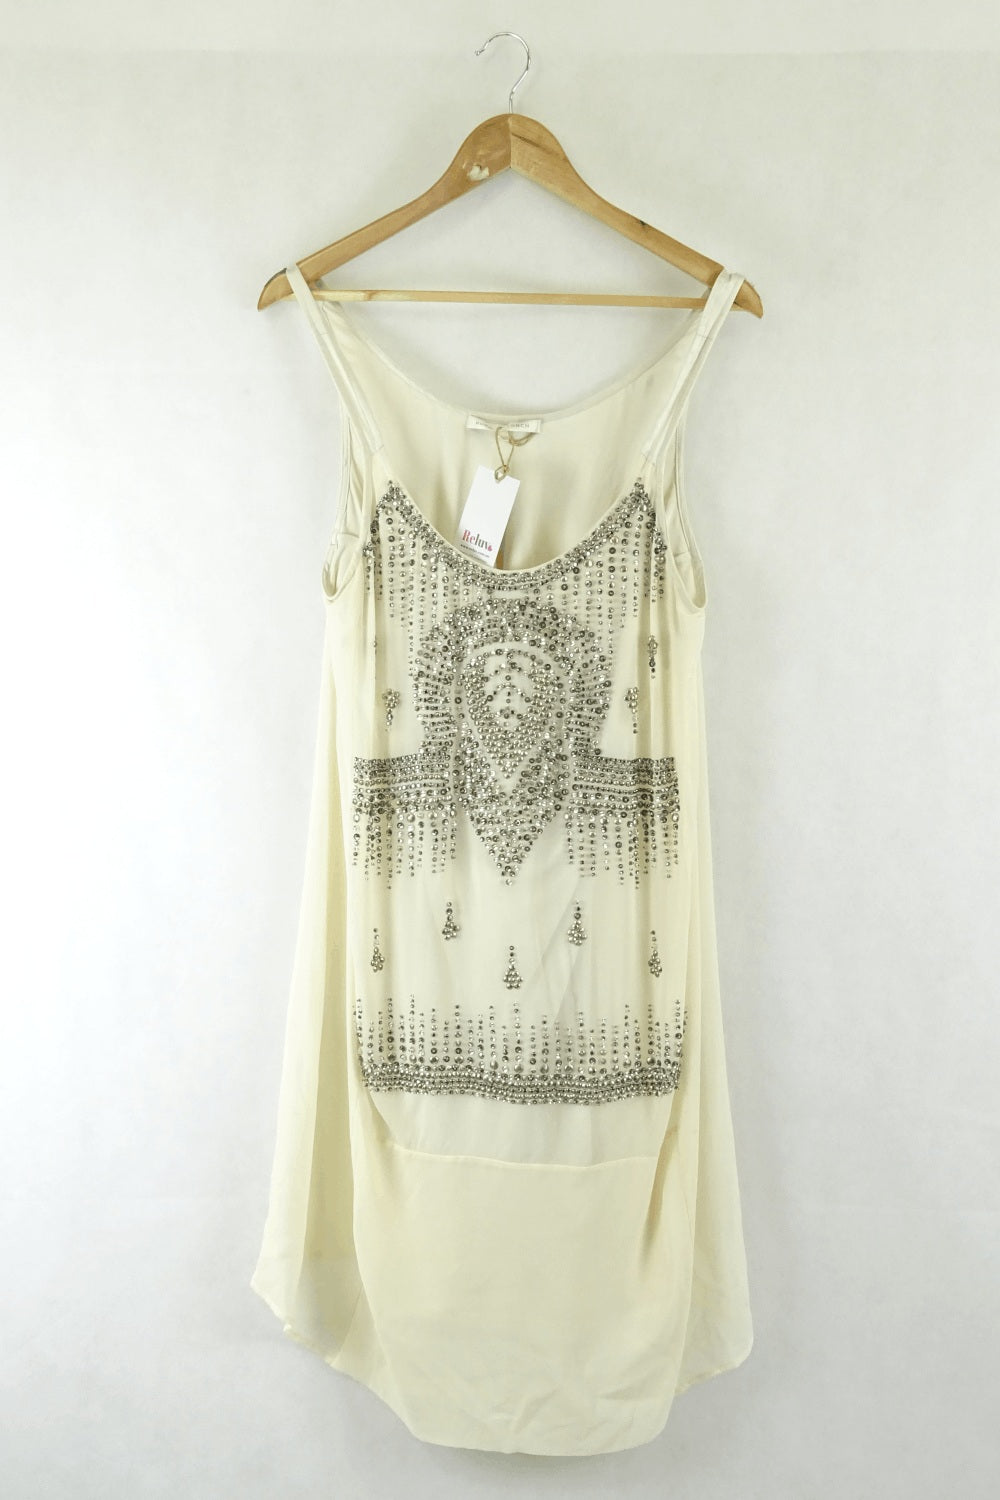 Burning Torch Cream Dress With Studs And Crystals Throughout The Dress L